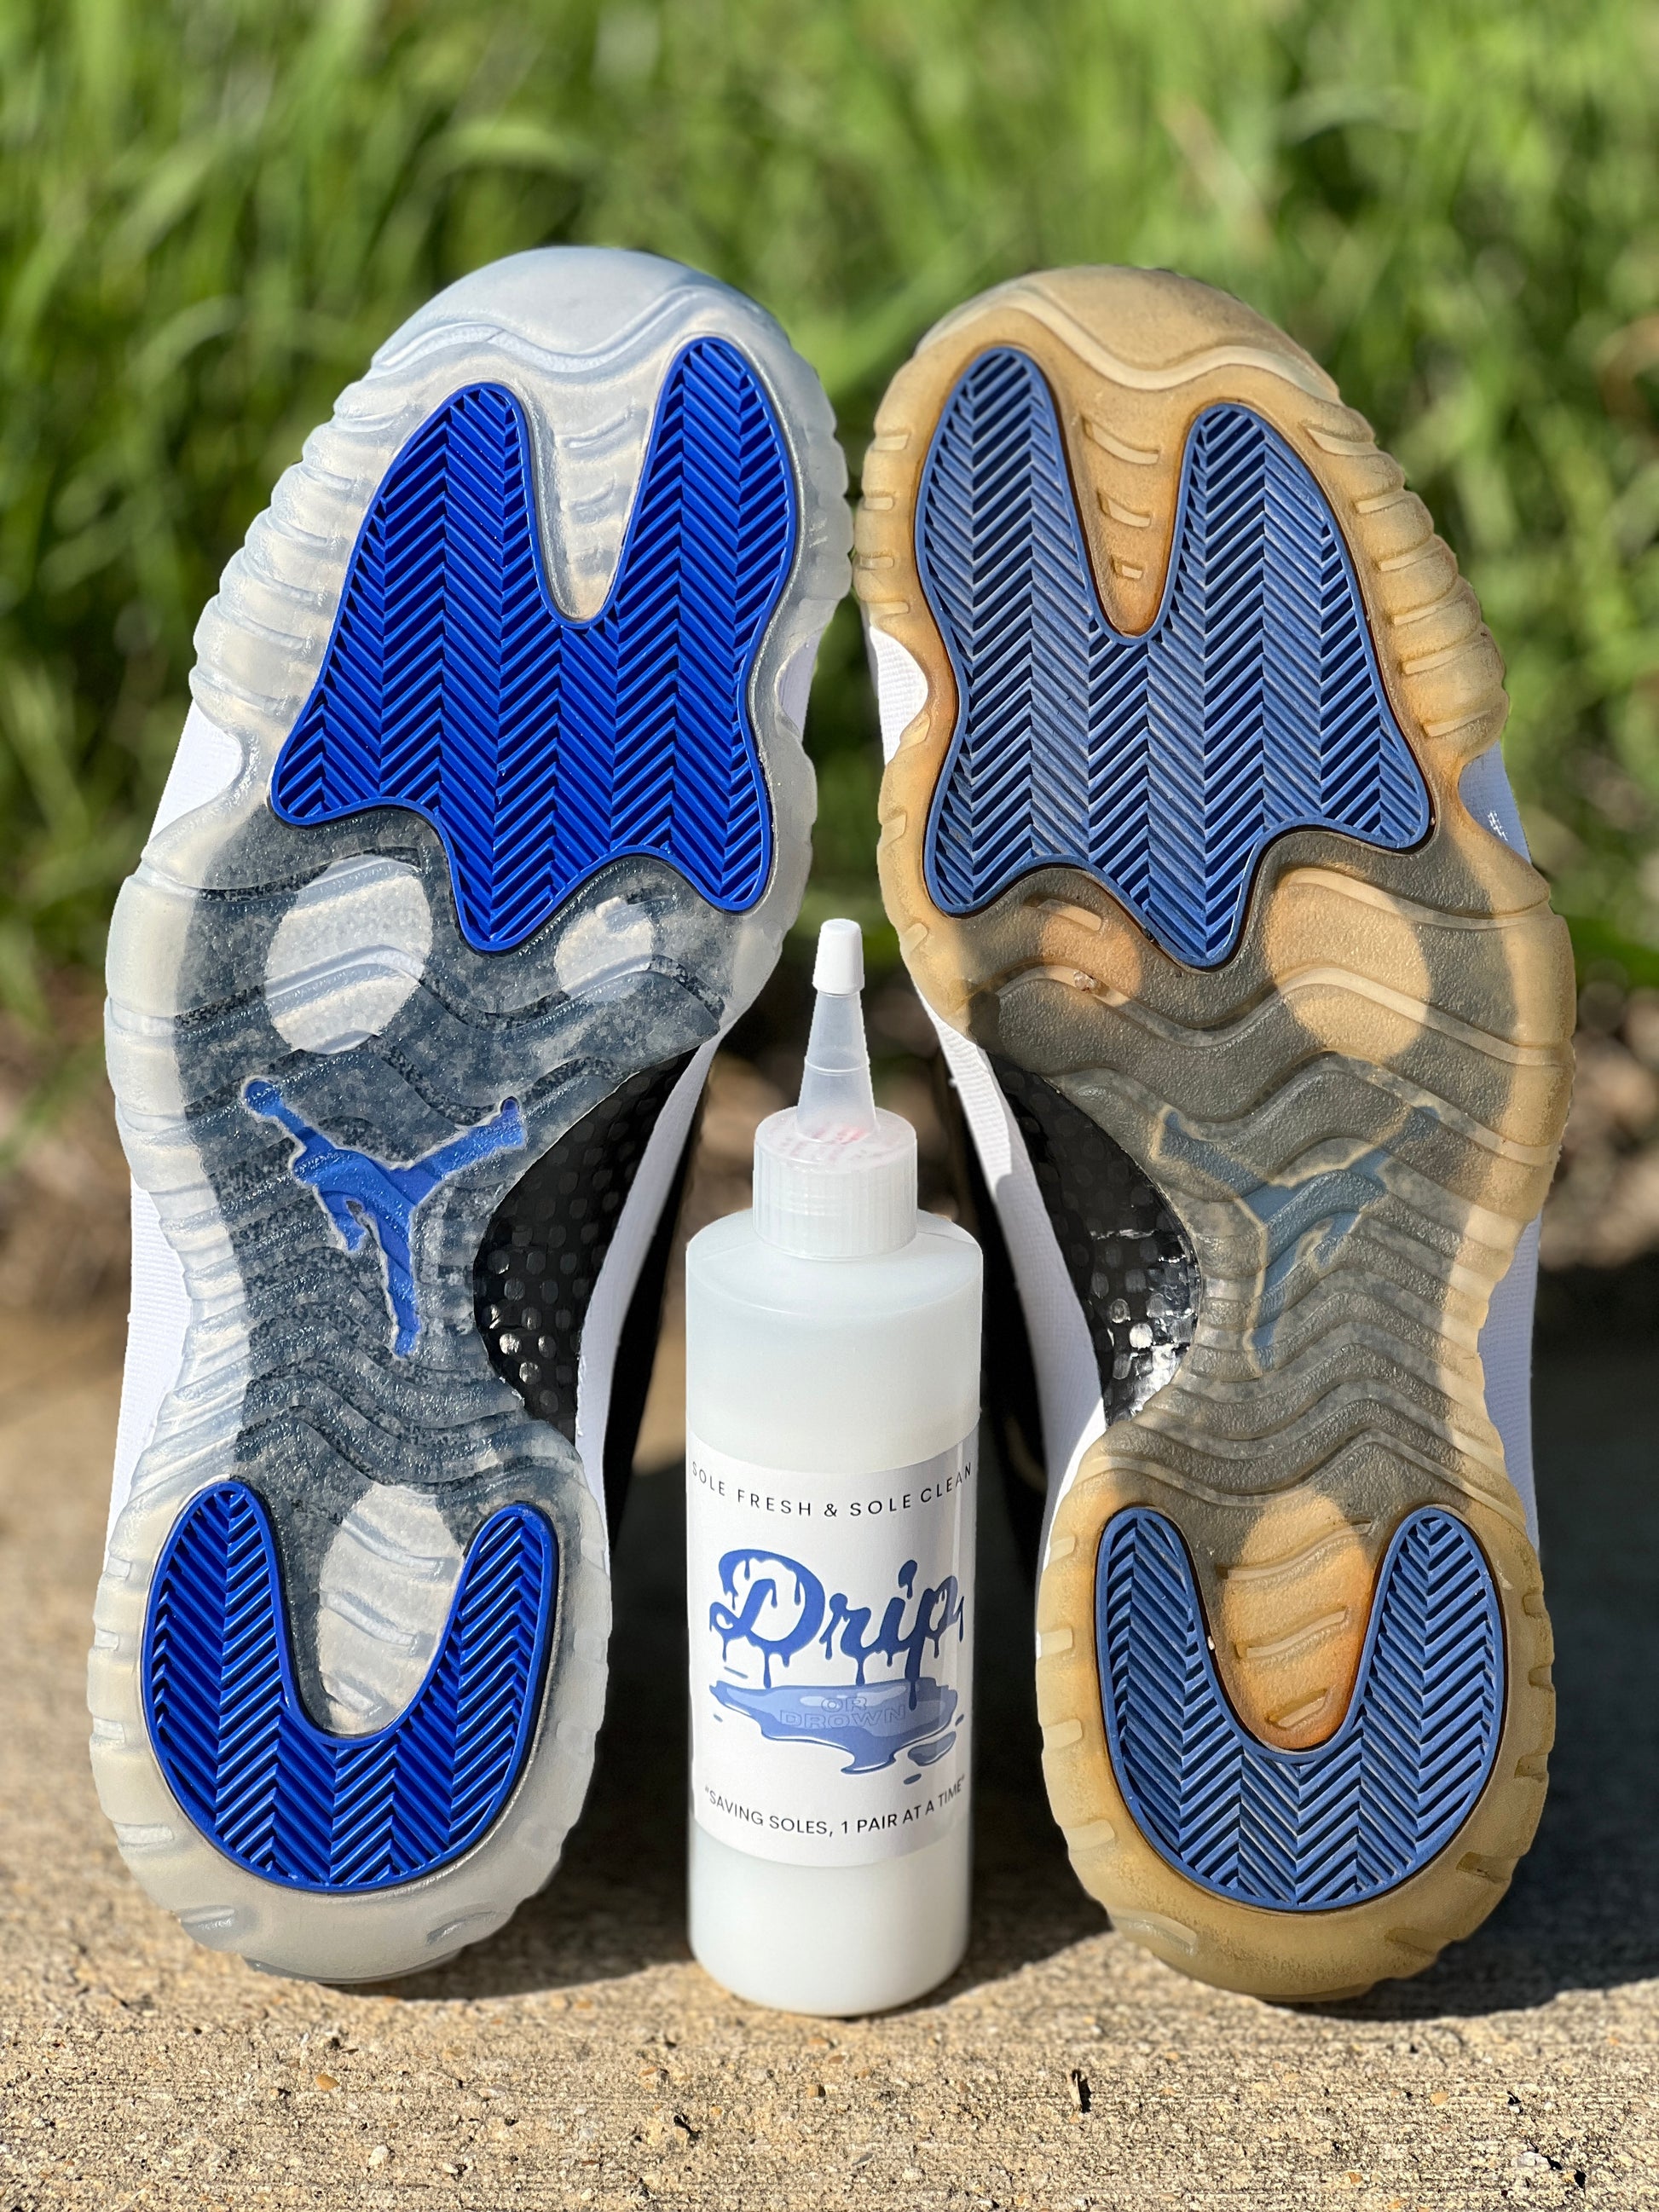 Best Sole and Shoe Cleaner